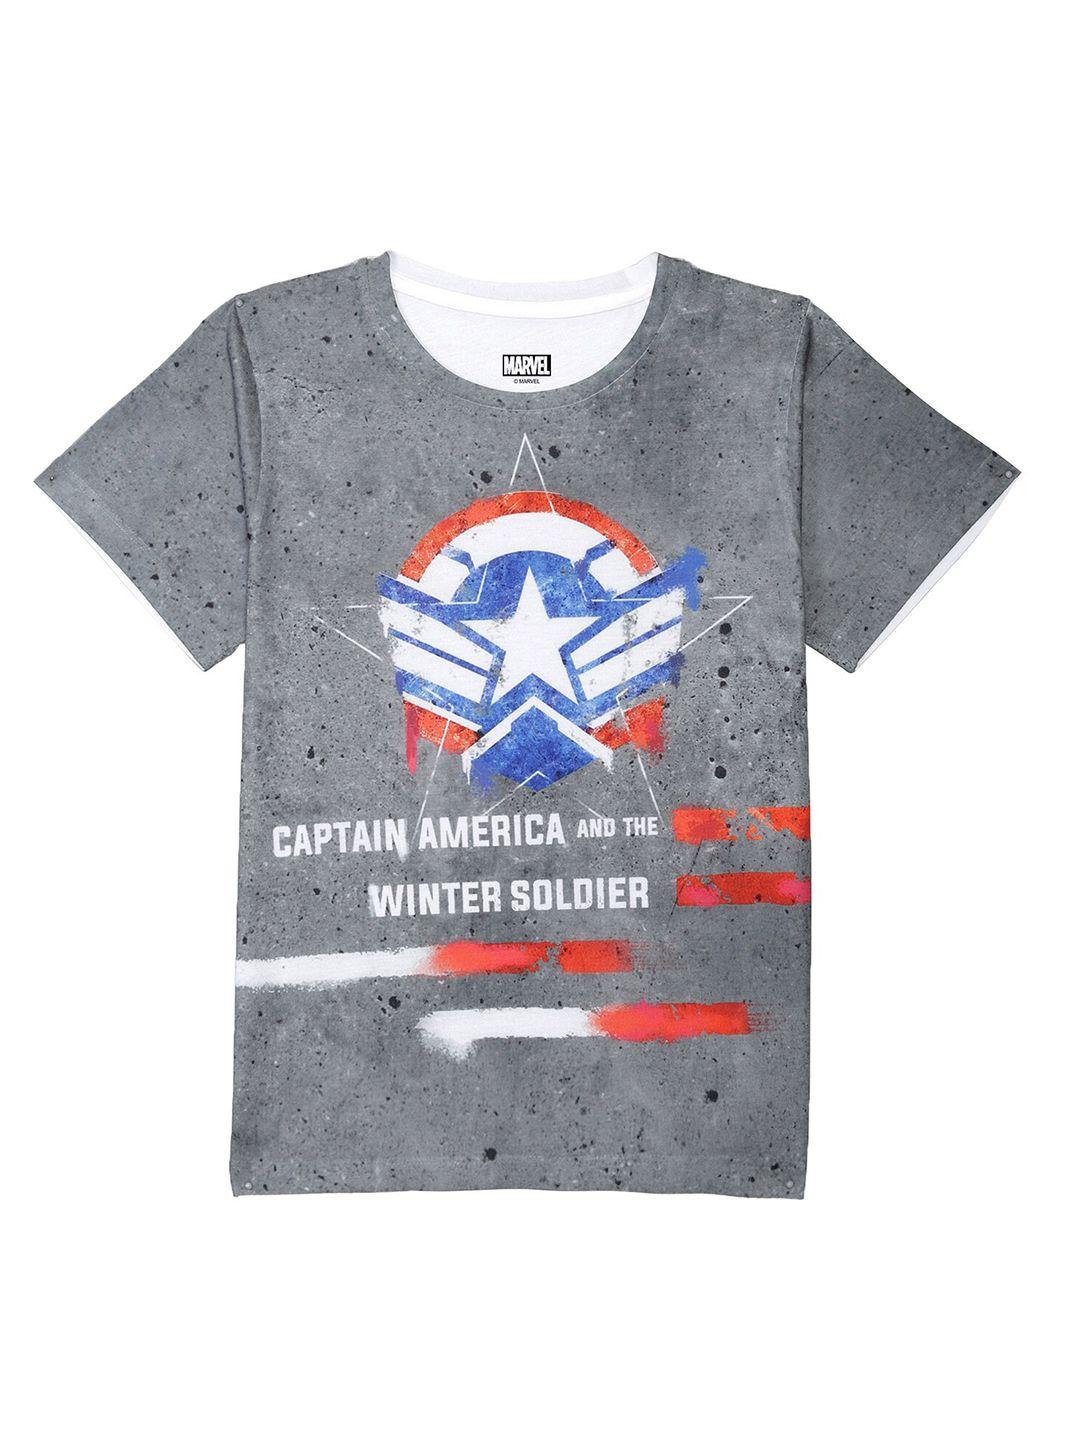 marvel-by-wear-your-mind-boys-grey-captain-america-printed-t-shirt